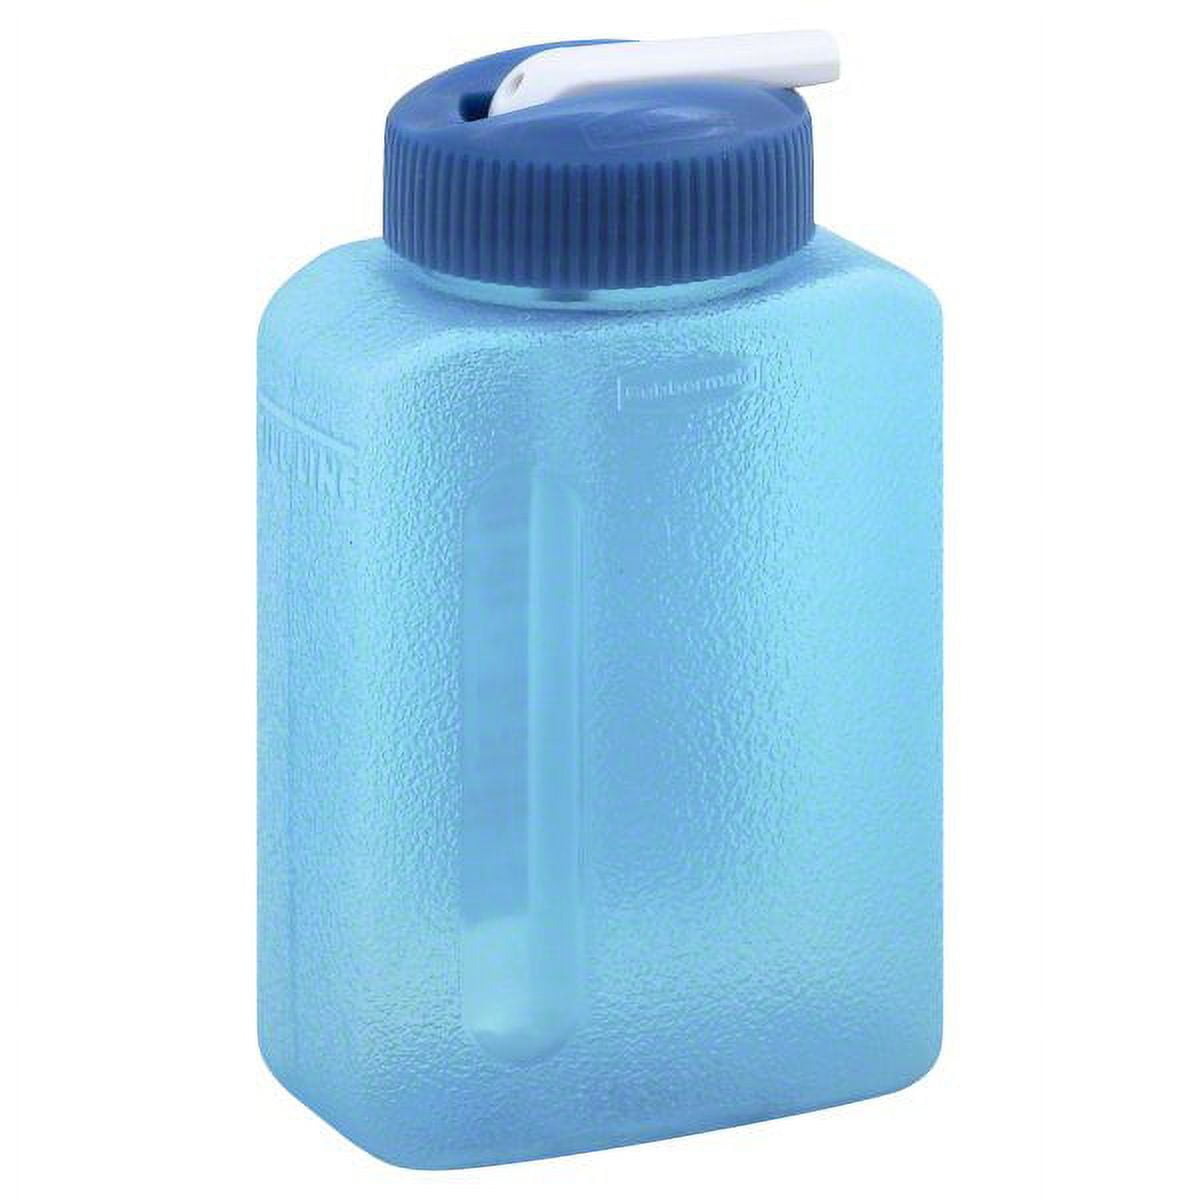 RUBBERMAID JUICE BOX, Litterless, 8.5 Oz / 250 Ml (Pack of 4) - Blue with  straw $19.99 - PicClick